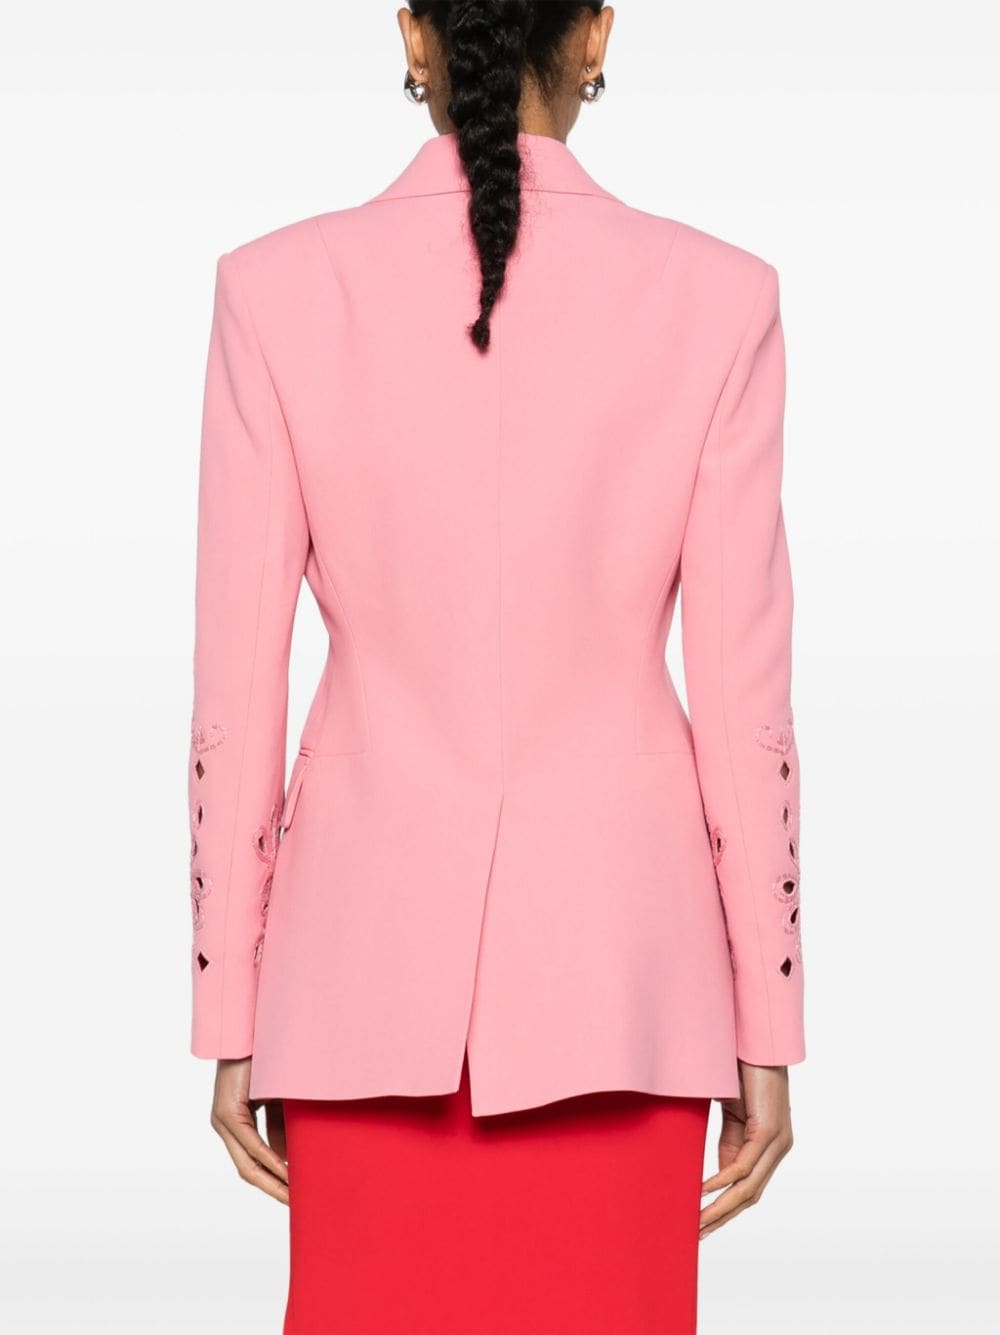 Single-breasted blazer with cut-out detail